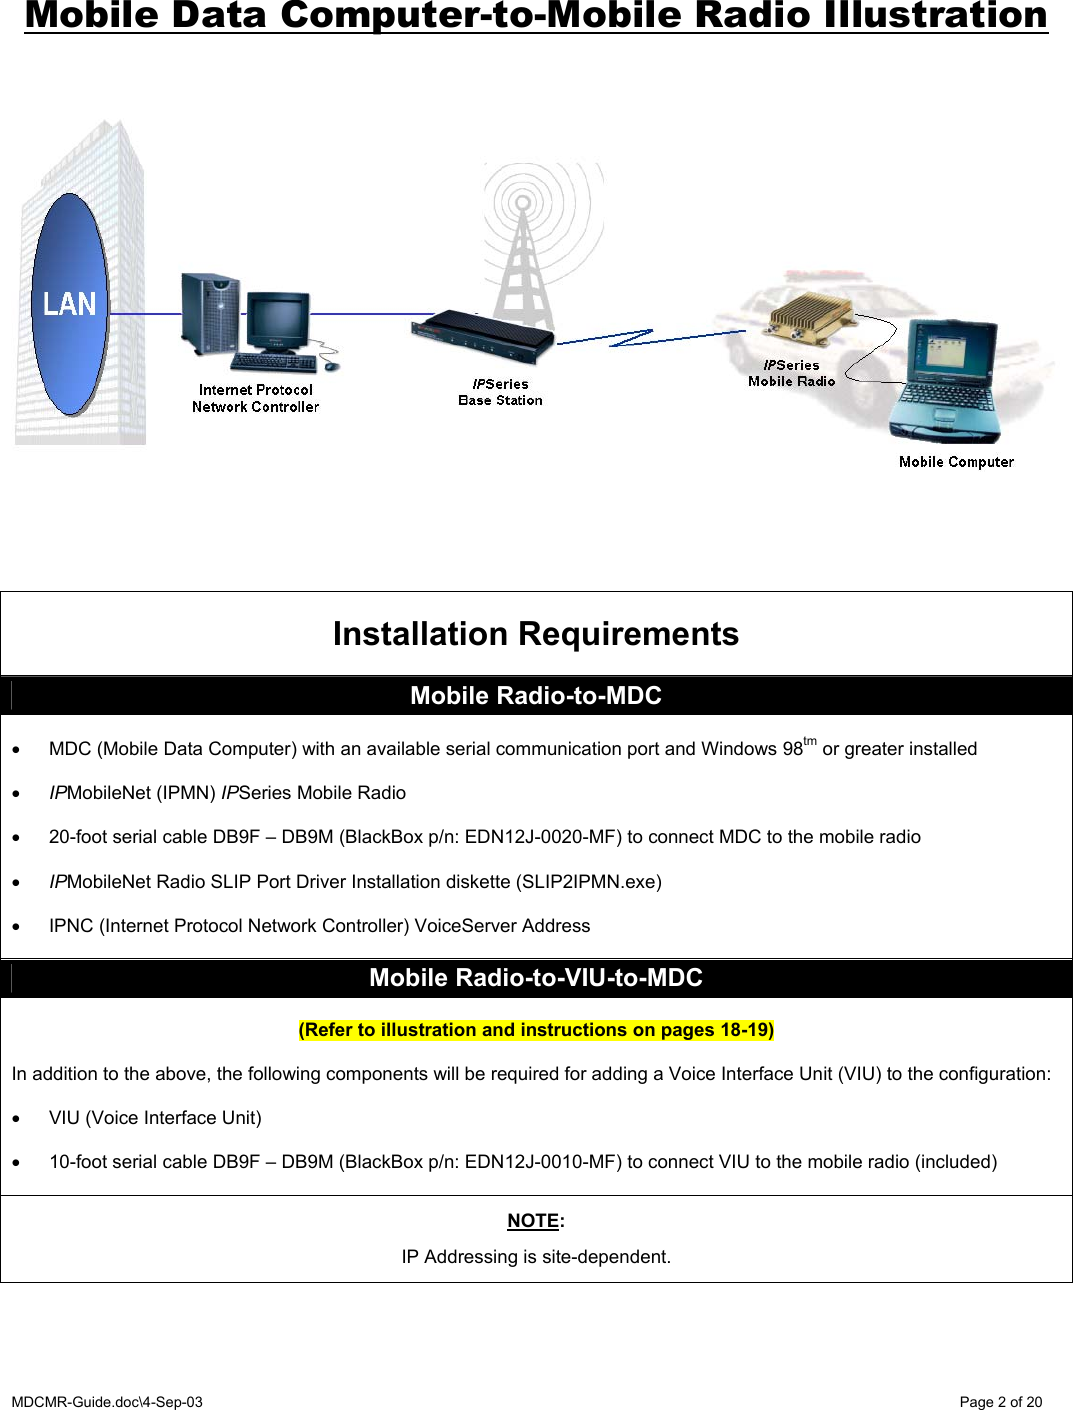 MDCMR-Guide.doc\4-Sep-03   Page 2 of 20 Mobile Data Computer-to-Mobile Radio Illustration          Installation Requirements Mobile Radio-to-MDC  •  MDC (Mobile Data Computer) with an available serial communication port and Windows 98tm or greater installed  •  IPMobileNet (IPMN) IPSeries Mobile Radio  •  20-foot serial cable DB9F – DB9M (BlackBox p/n: EDN12J-0020-MF) to connect MDC to the mobile radio  •  IPMobileNet Radio SLIP Port Driver Installation diskette (SLIP2IPMN.exe)  •  IPNC (Internet Protocol Network Controller) VoiceServer Address  Mobile Radio-to-VIU-to-MDC  (Refer to illustration and instructions on pages 18-19)  In addition to the above, the following components will be required for adding a Voice Interface Unit (VIU) to the configuration:  •  VIU (Voice Interface Unit)   •  10-foot serial cable DB9F – DB9M (BlackBox p/n: EDN12J-0010-MF) to connect VIU to the mobile radio (included)    NOTE:  IP Addressing is site-dependent.   